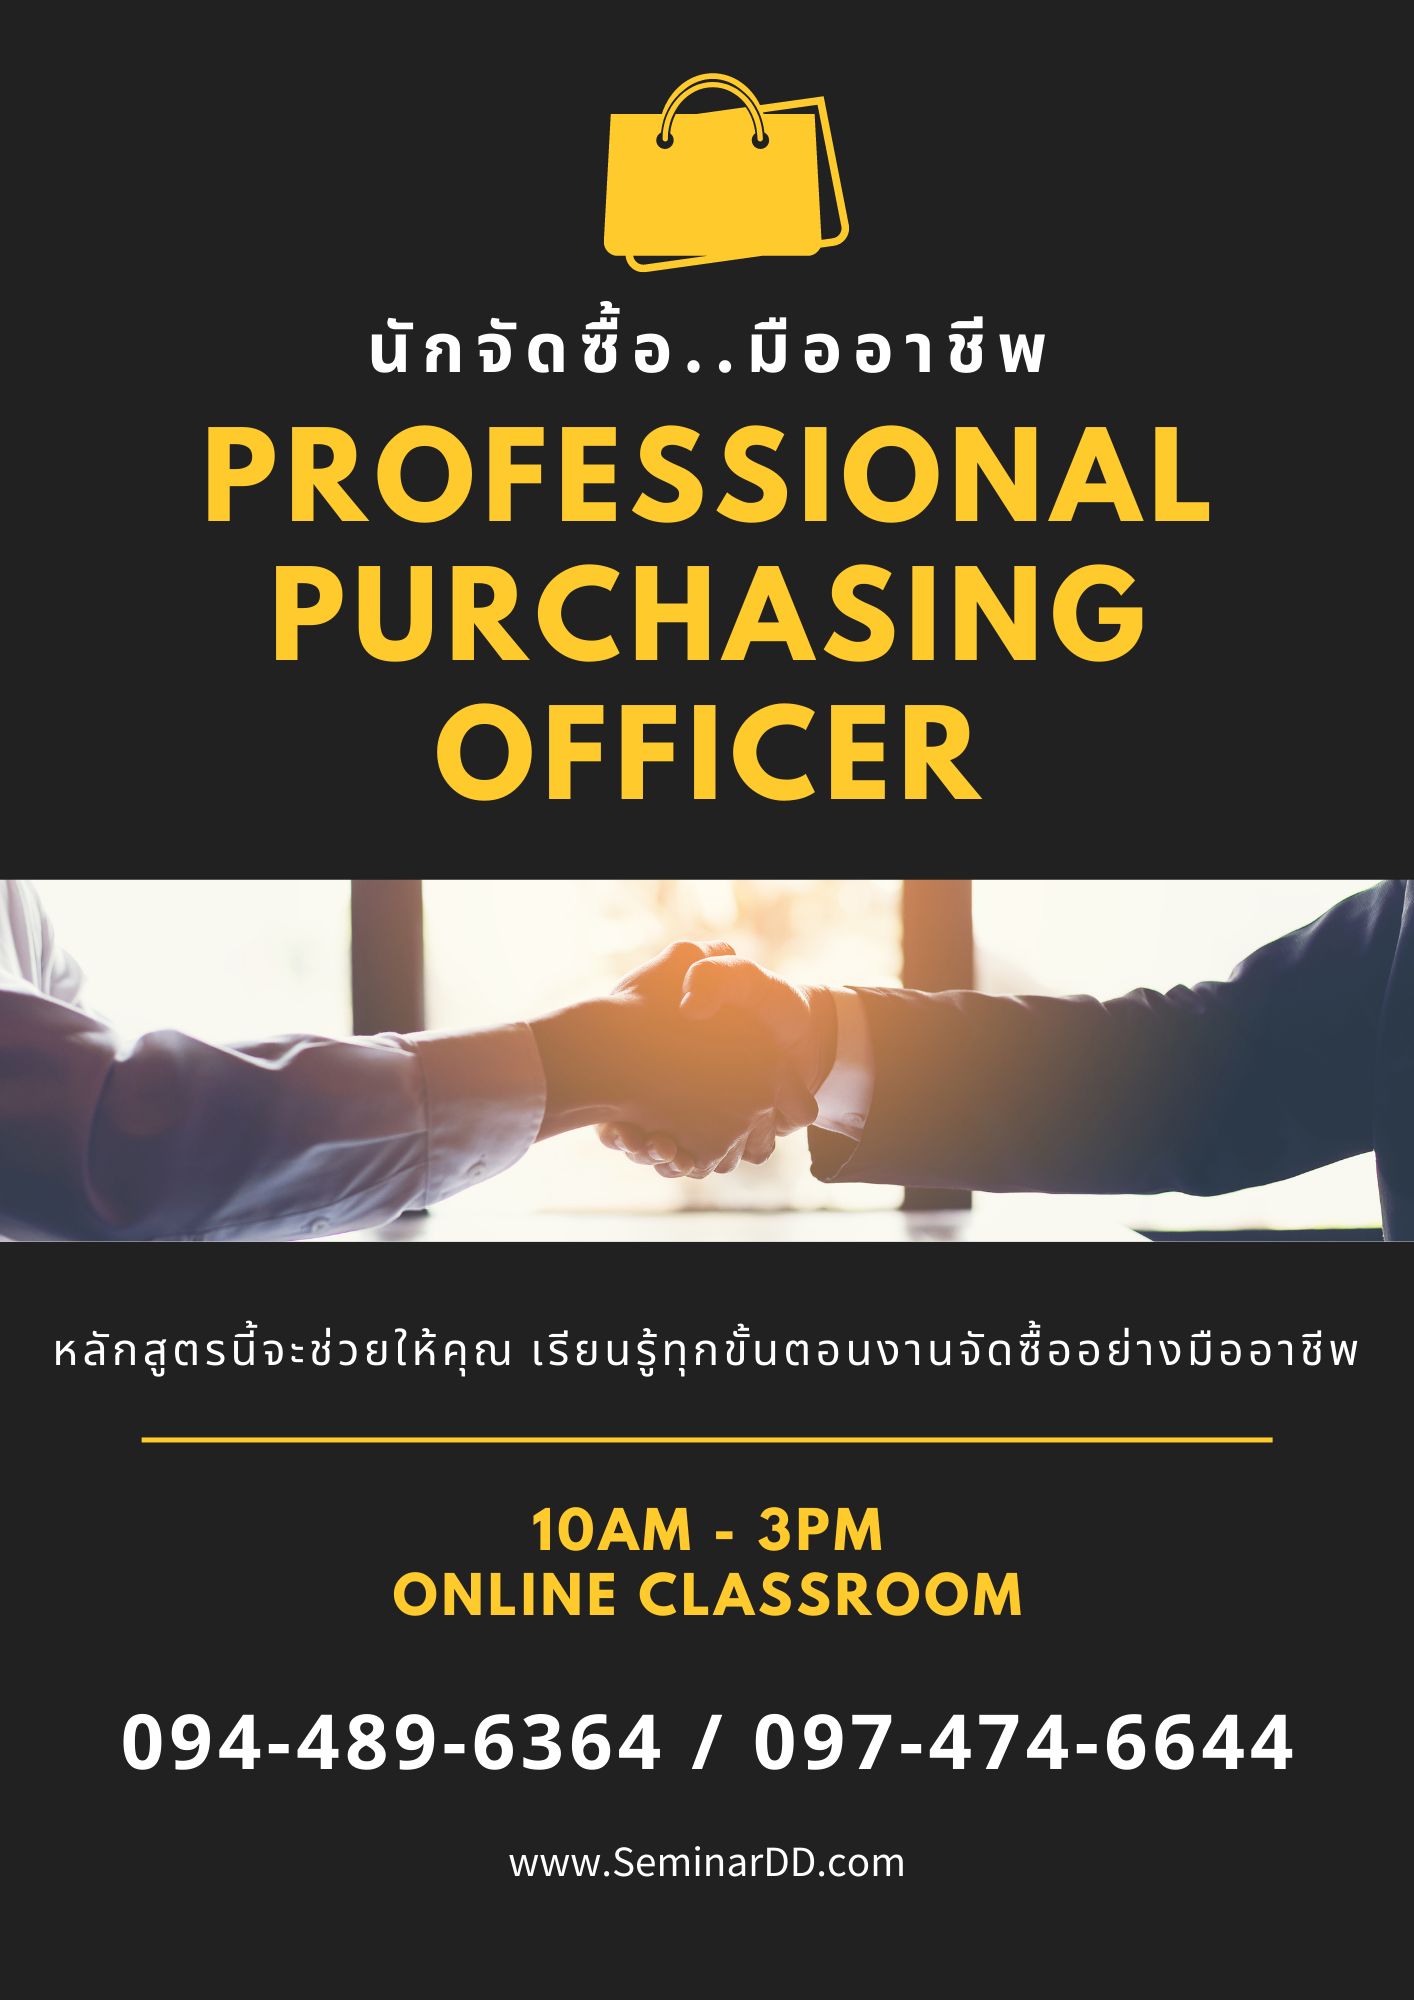 Online by Zoom หลักสูตร อบรมหลักสูตร นักจัดซื้อ..มืออาชีพ (Professional Purchasing Officer)